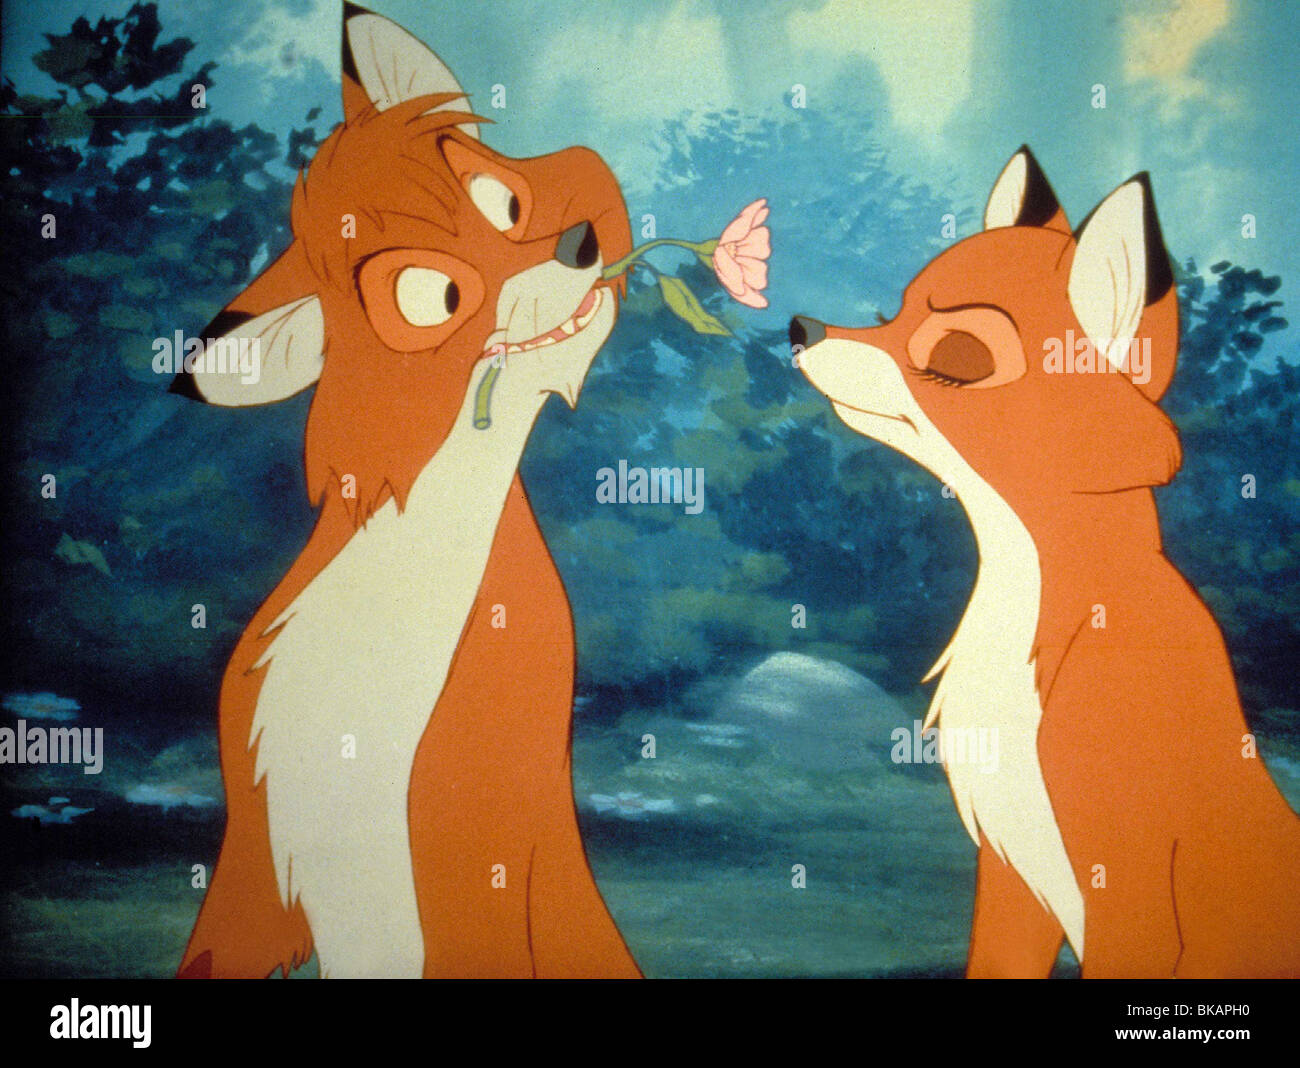 THE FOX AND THE HOUND (ANI - 1981) ANIMATED CREDIT DISNEY FATH 010 MOVIESTORE COLLECTION LTD Stock Photo